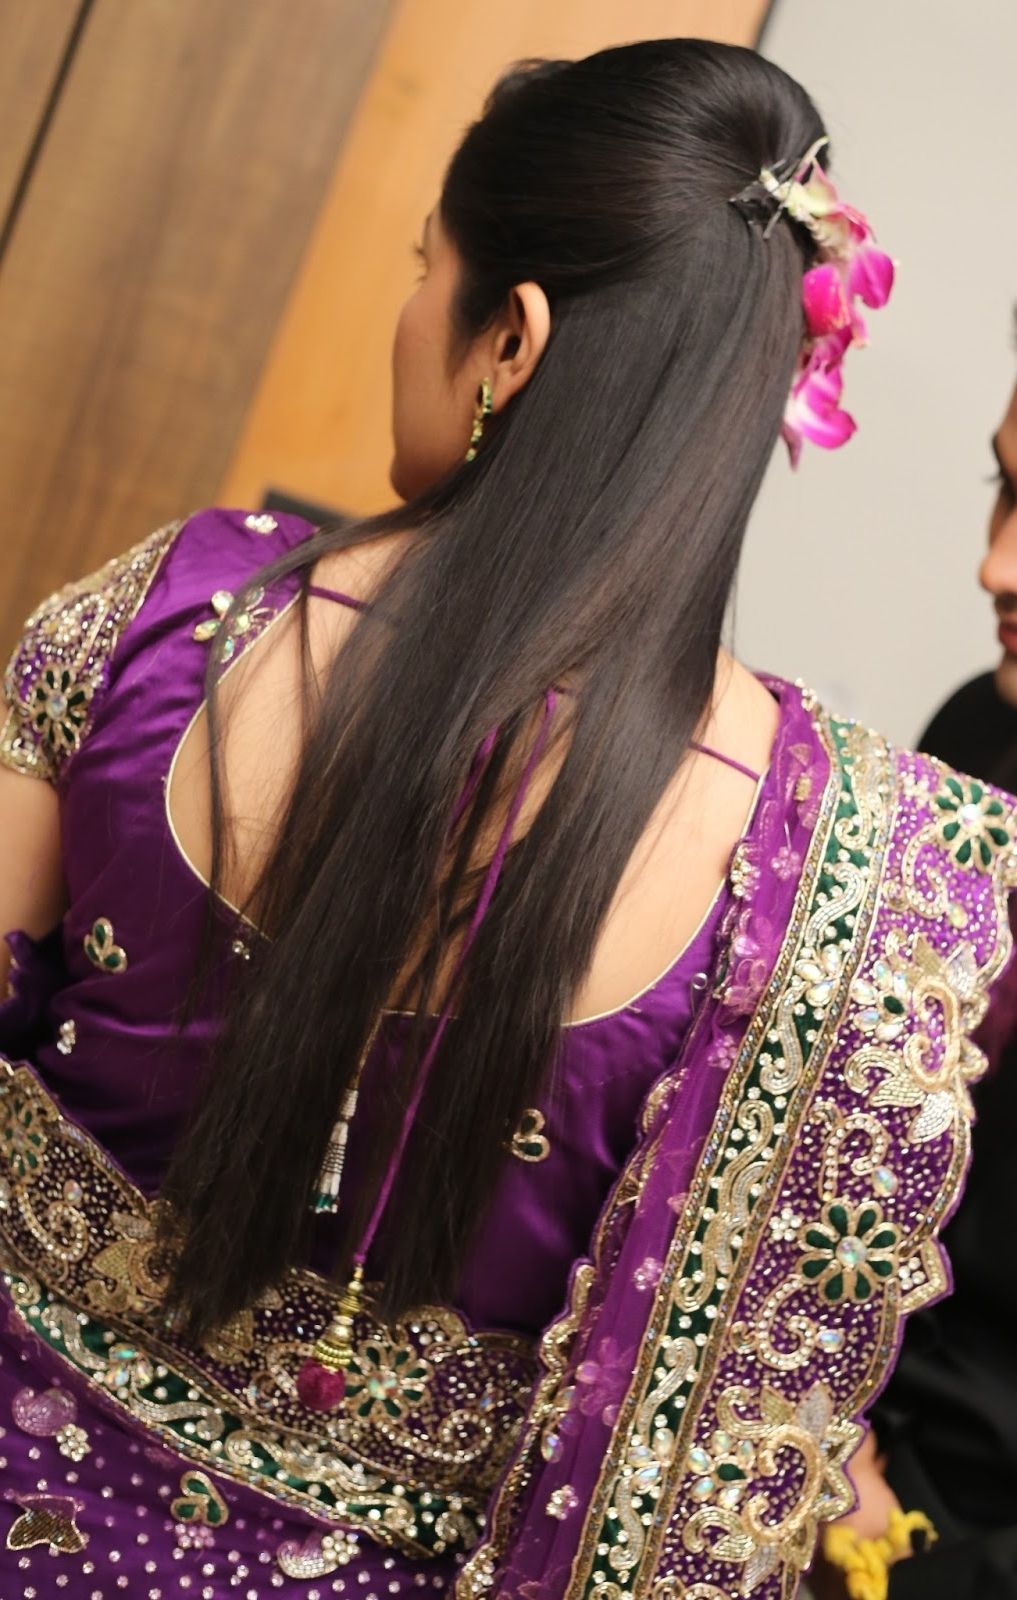 A Wedding Planner: Indian Wedding Bridal Hair Styles Inside Widely Used Maharashtrian Wedding Hairstyles For Long Hair (View 9 of 15)